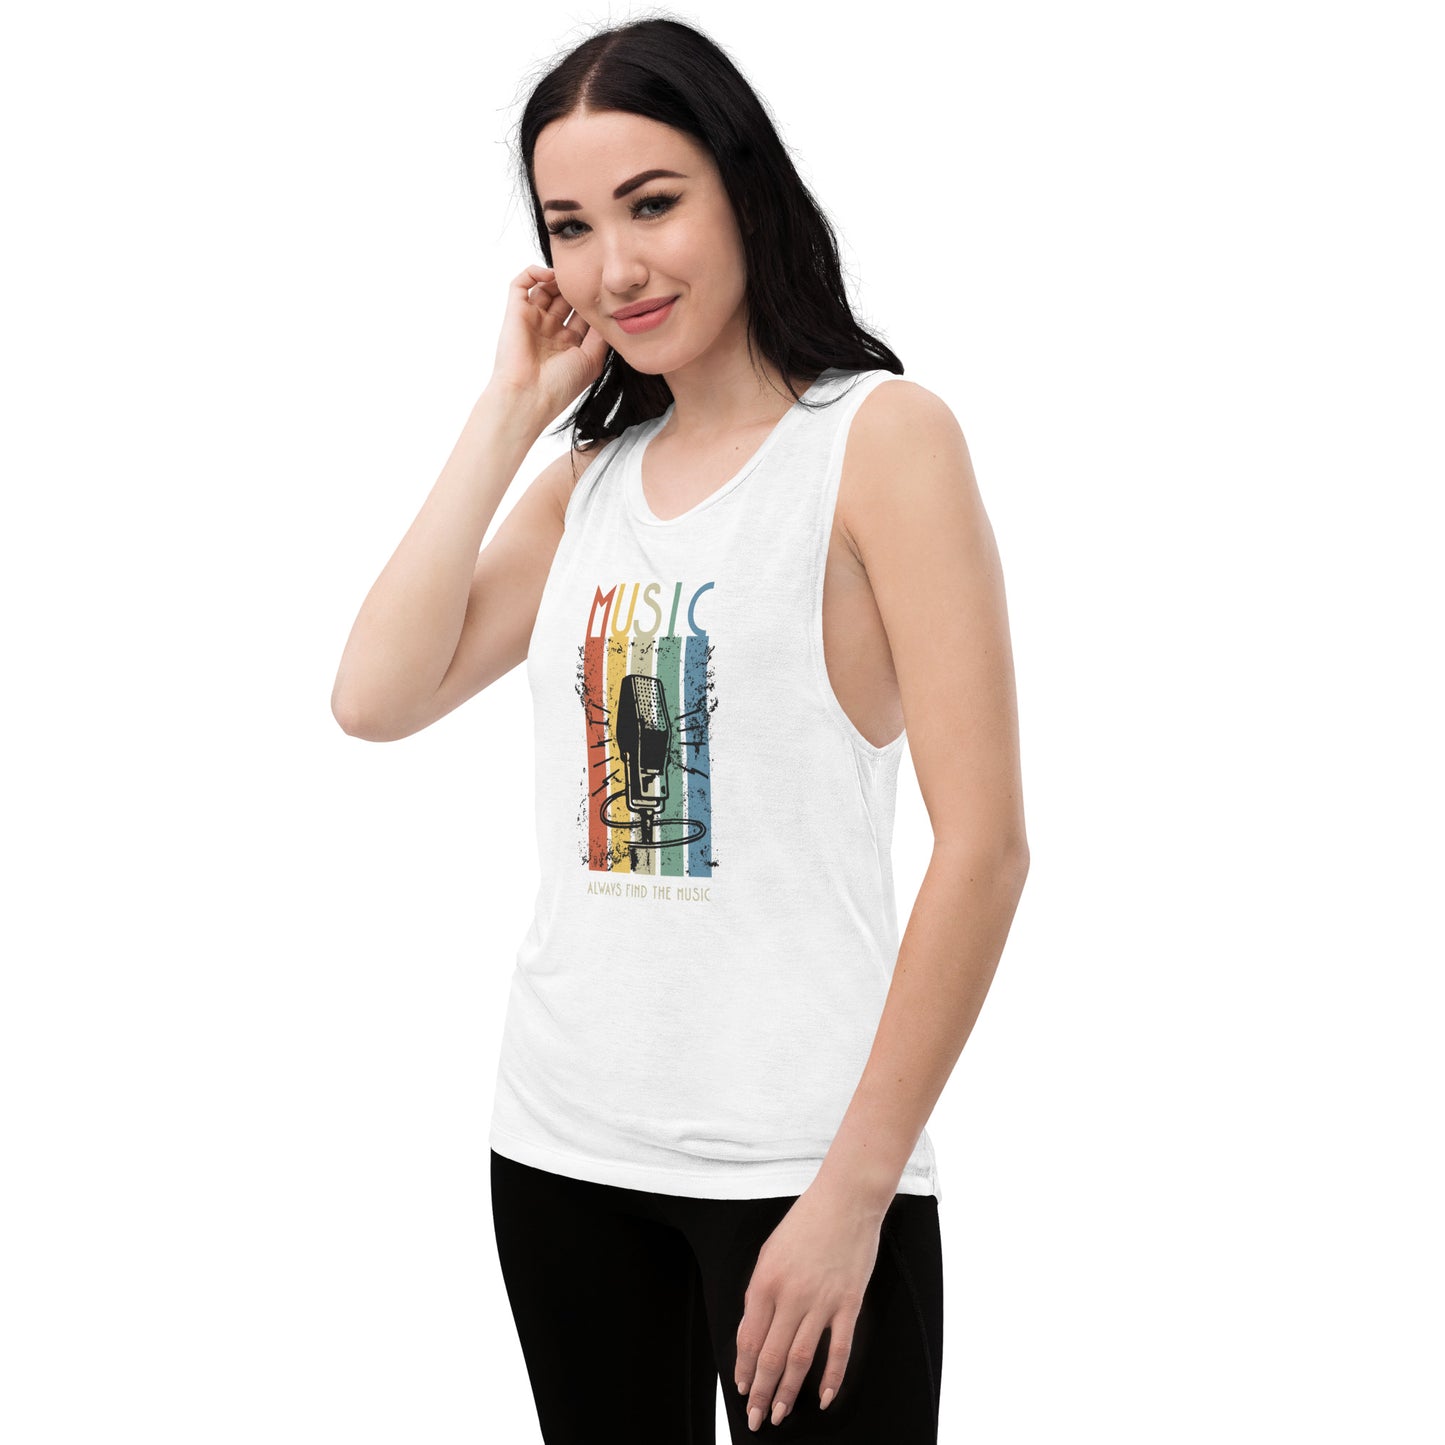 Always Find the Music Ladies’ Muscle Tank